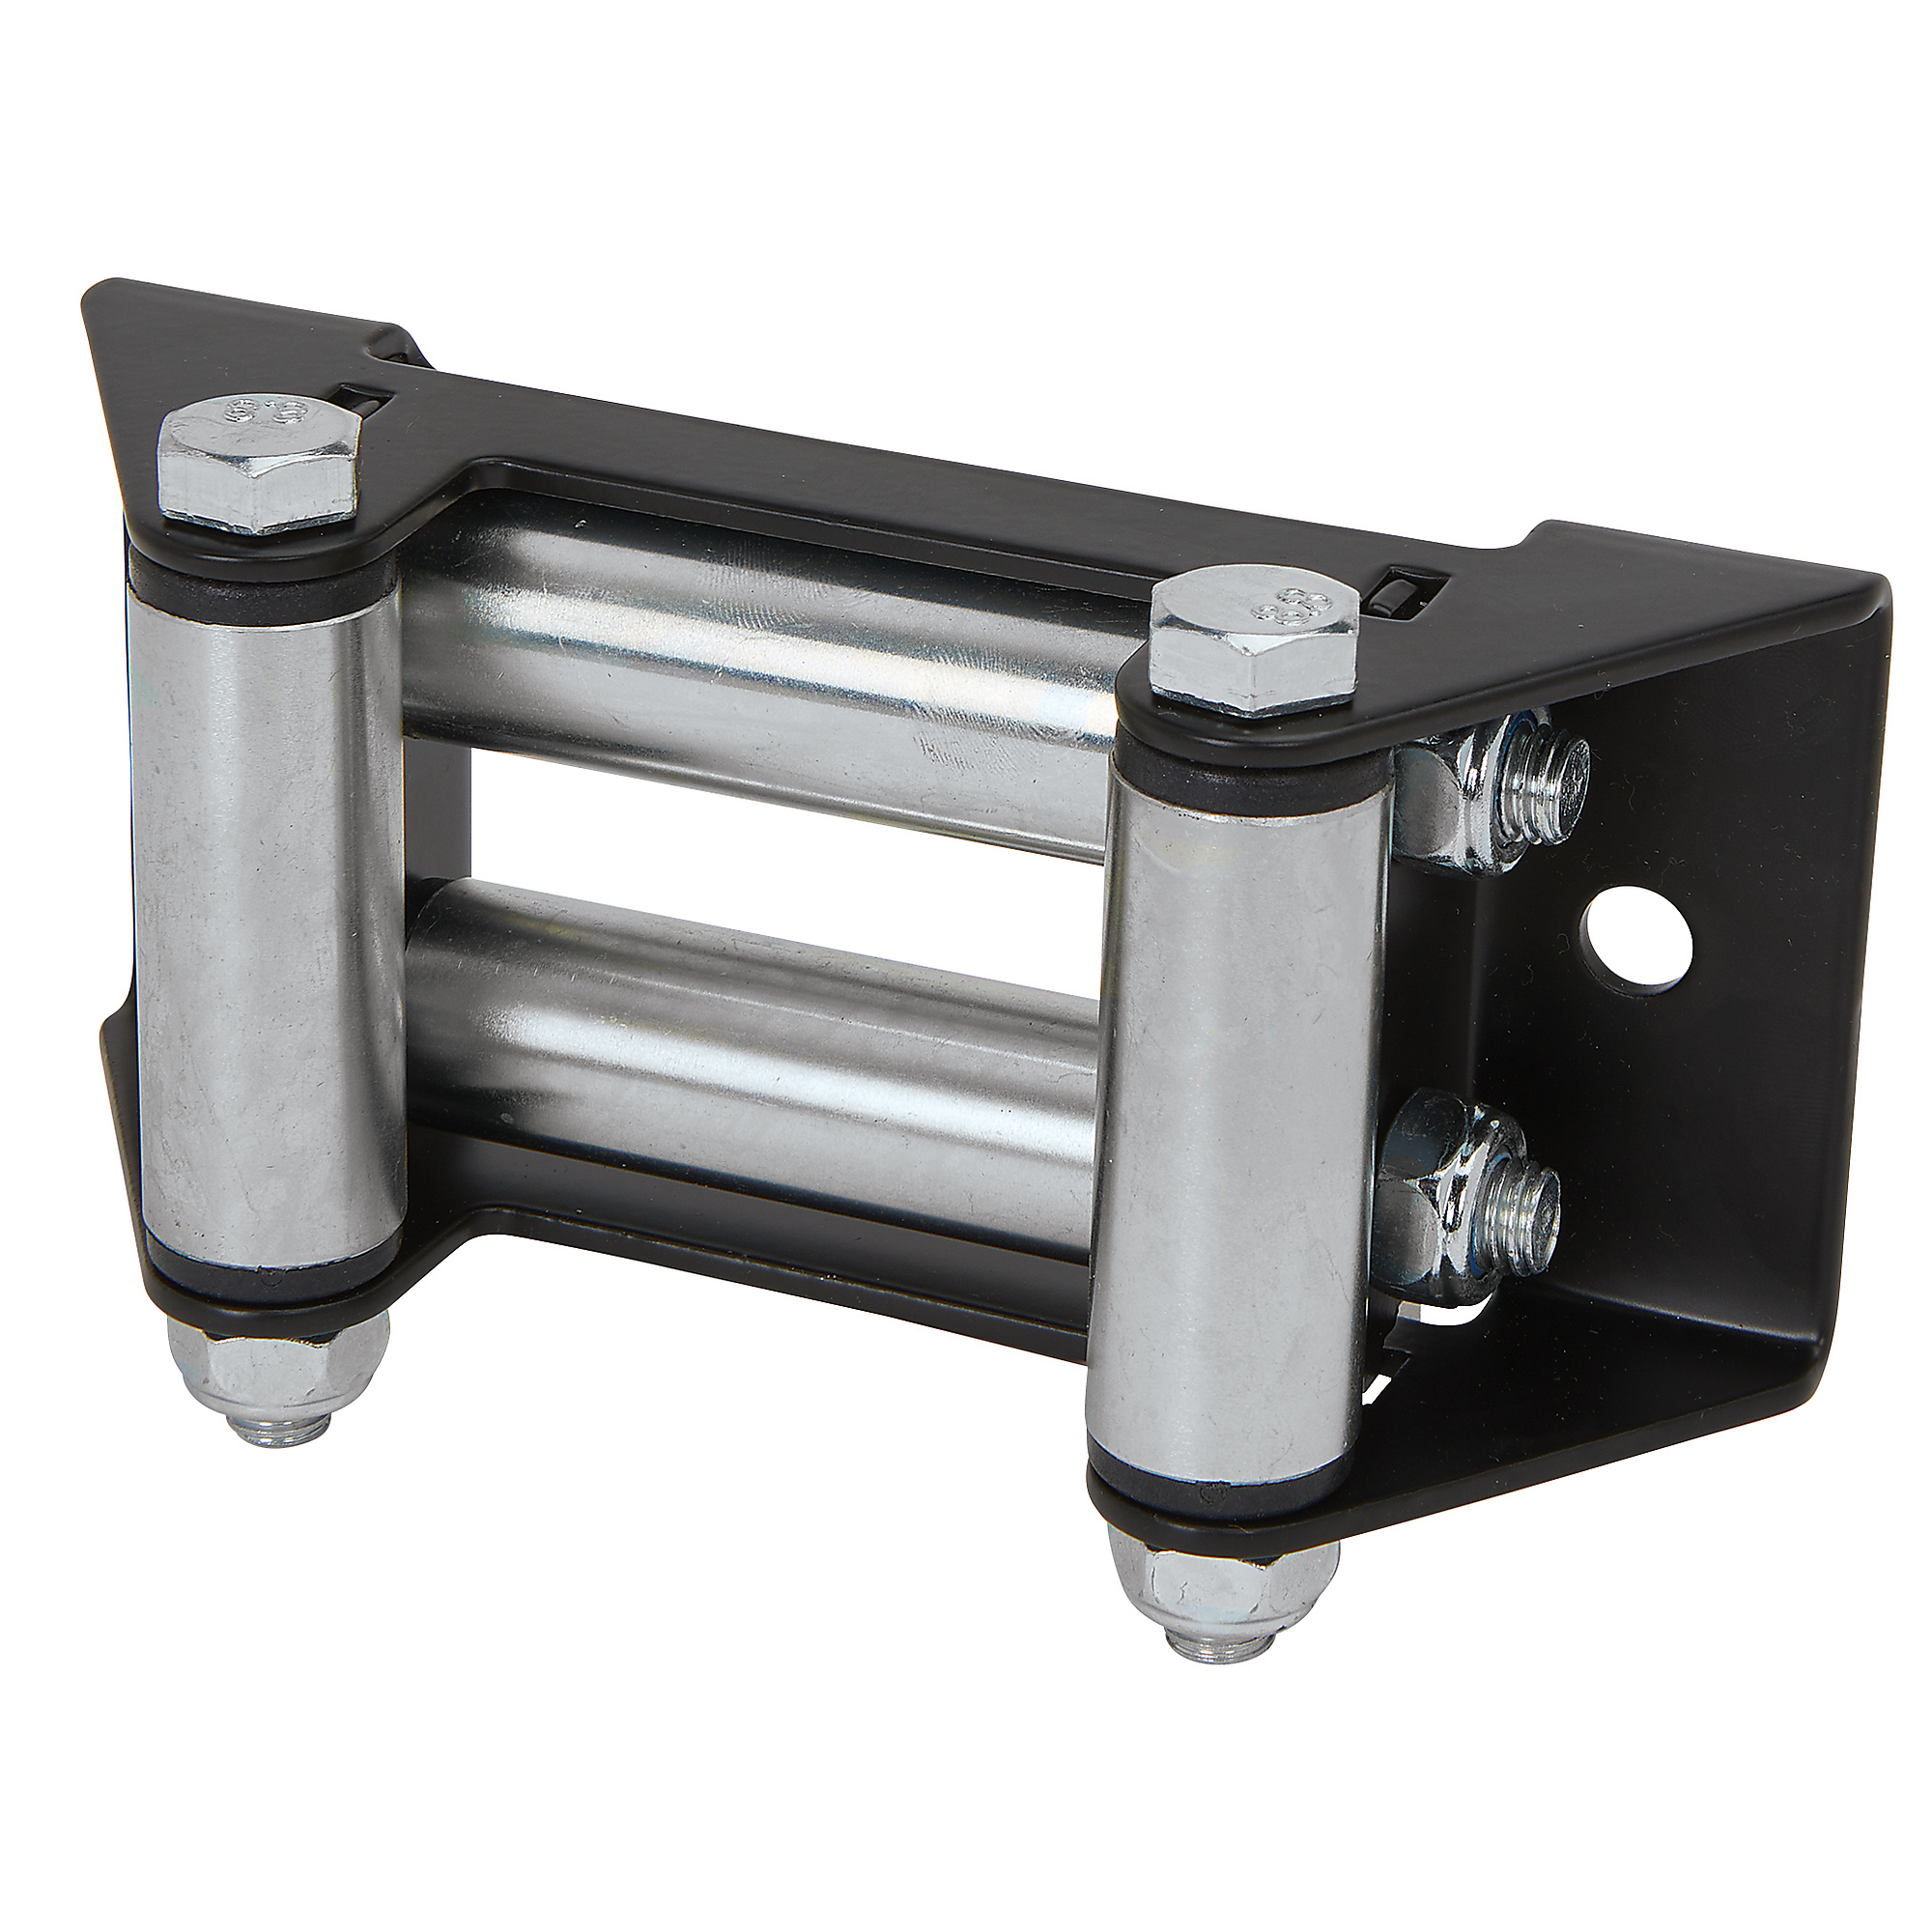 Ultra-Tow 4-Way Winch Roller Fairlead, for Use with 4500â5500-lb. Winches, 8Inch L x 1Inch W